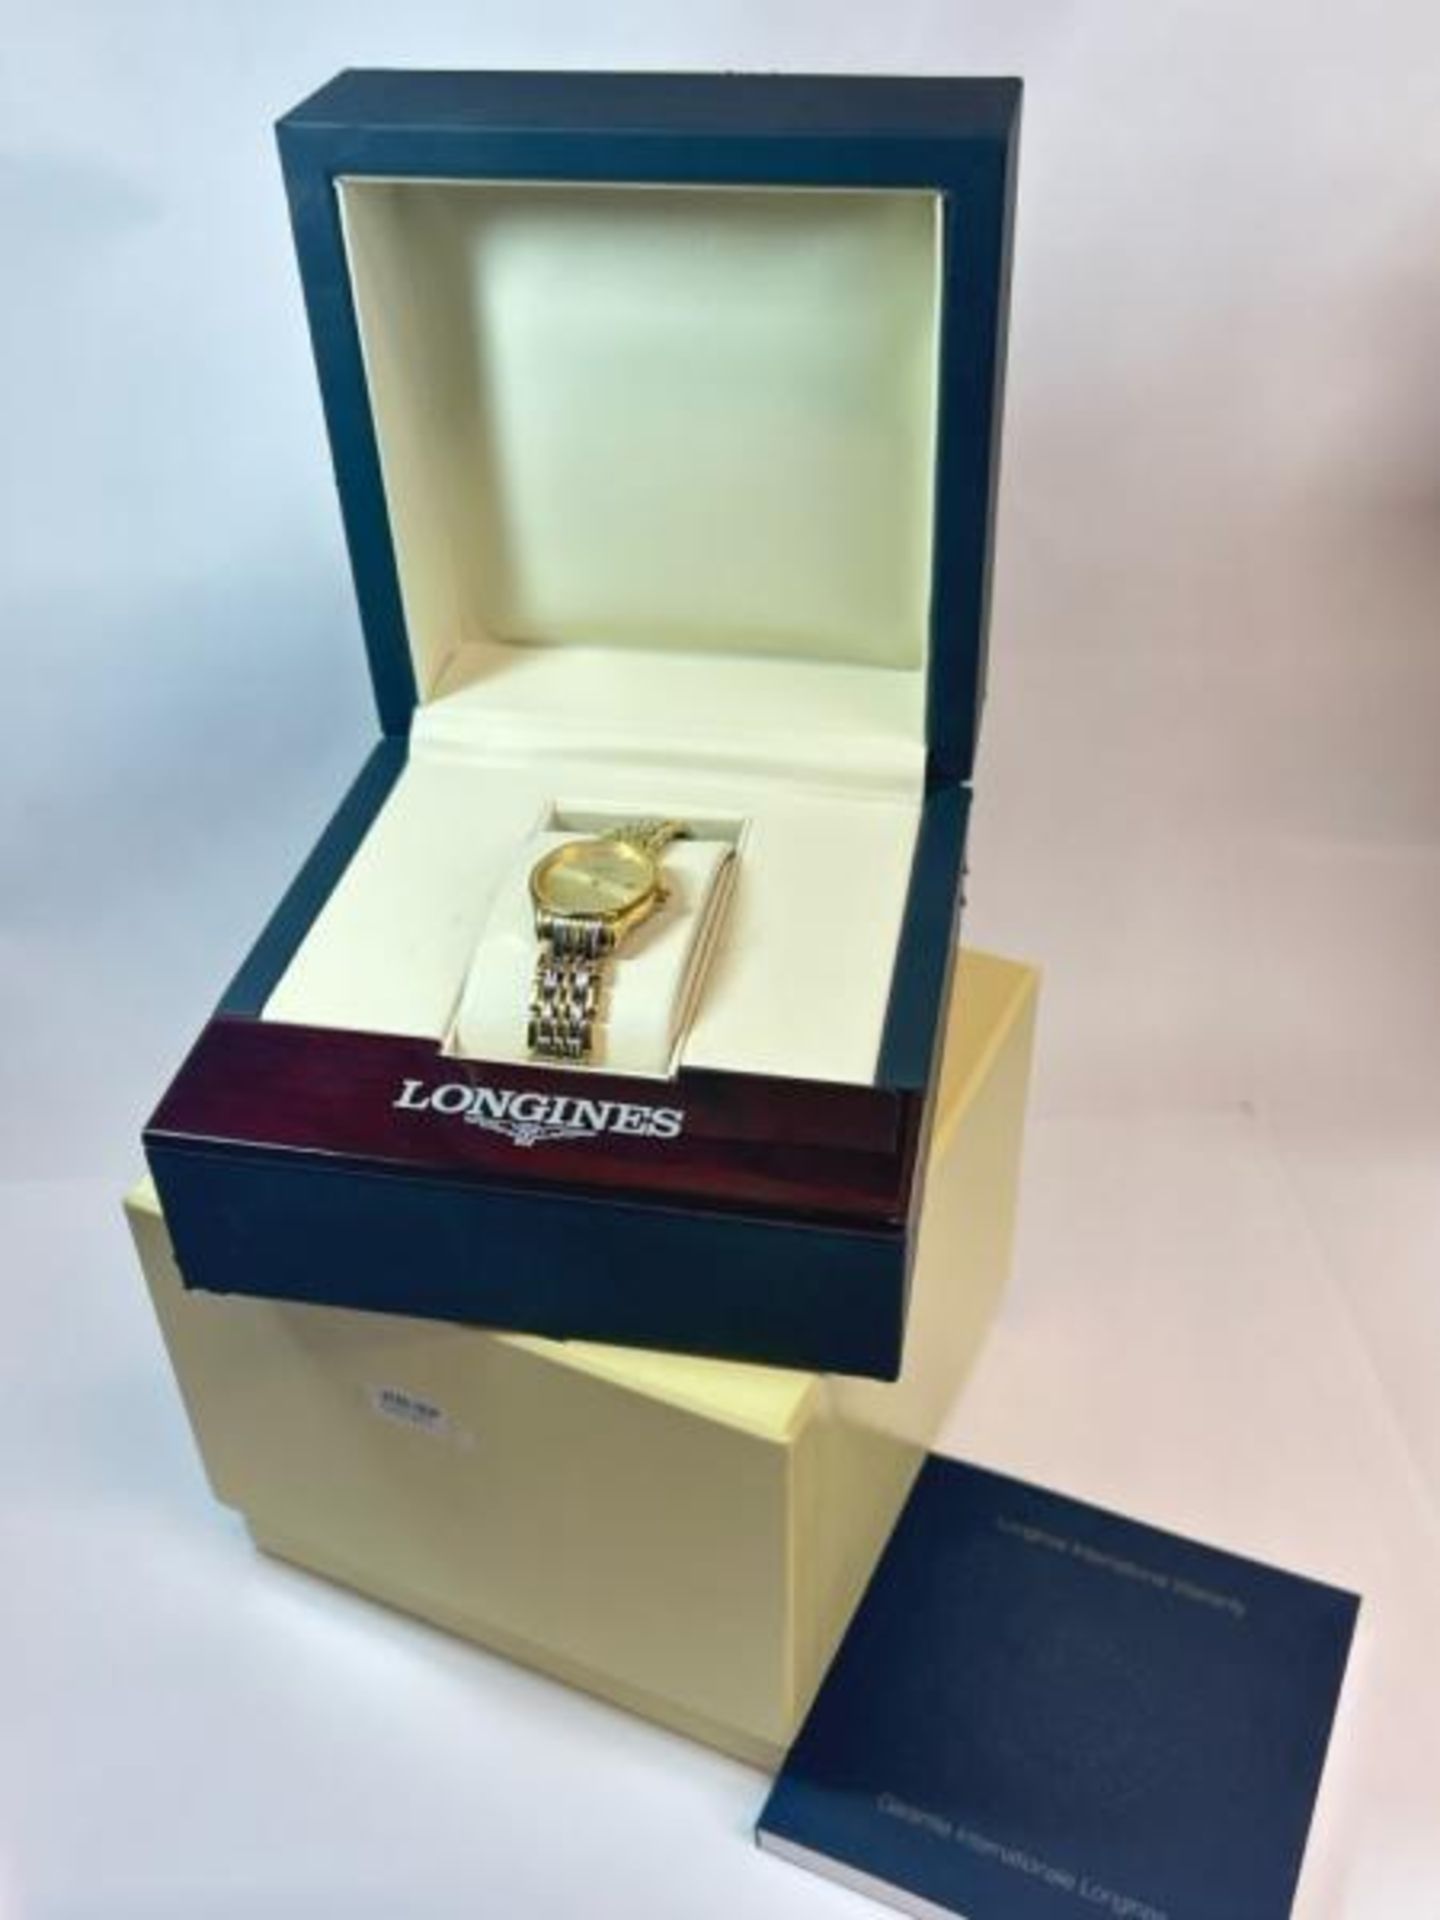 Longines Lyre stainless steel ladies bracelet watch model L4 259 2, with box / SF - Image 6 of 7